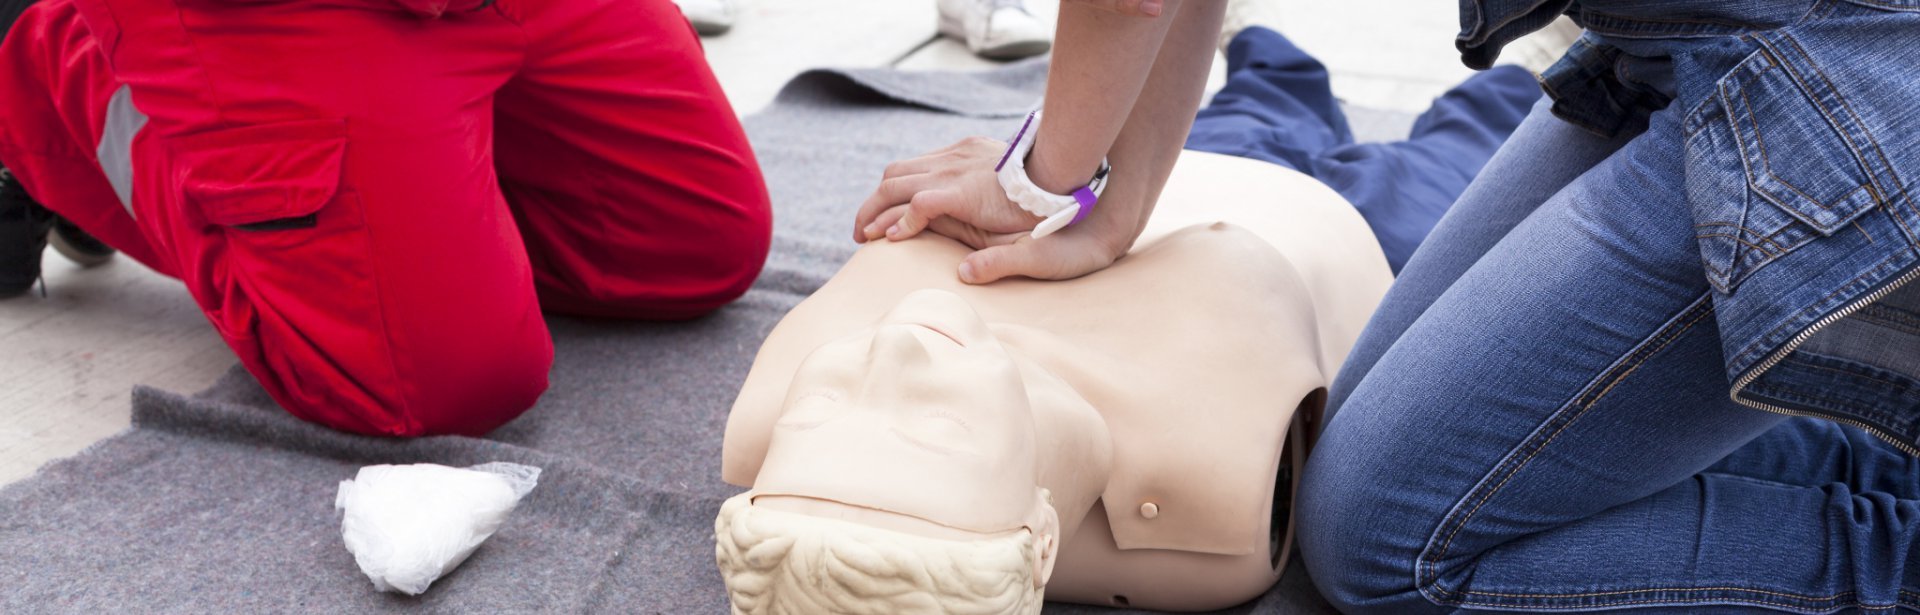 First Aid At Work Requalification